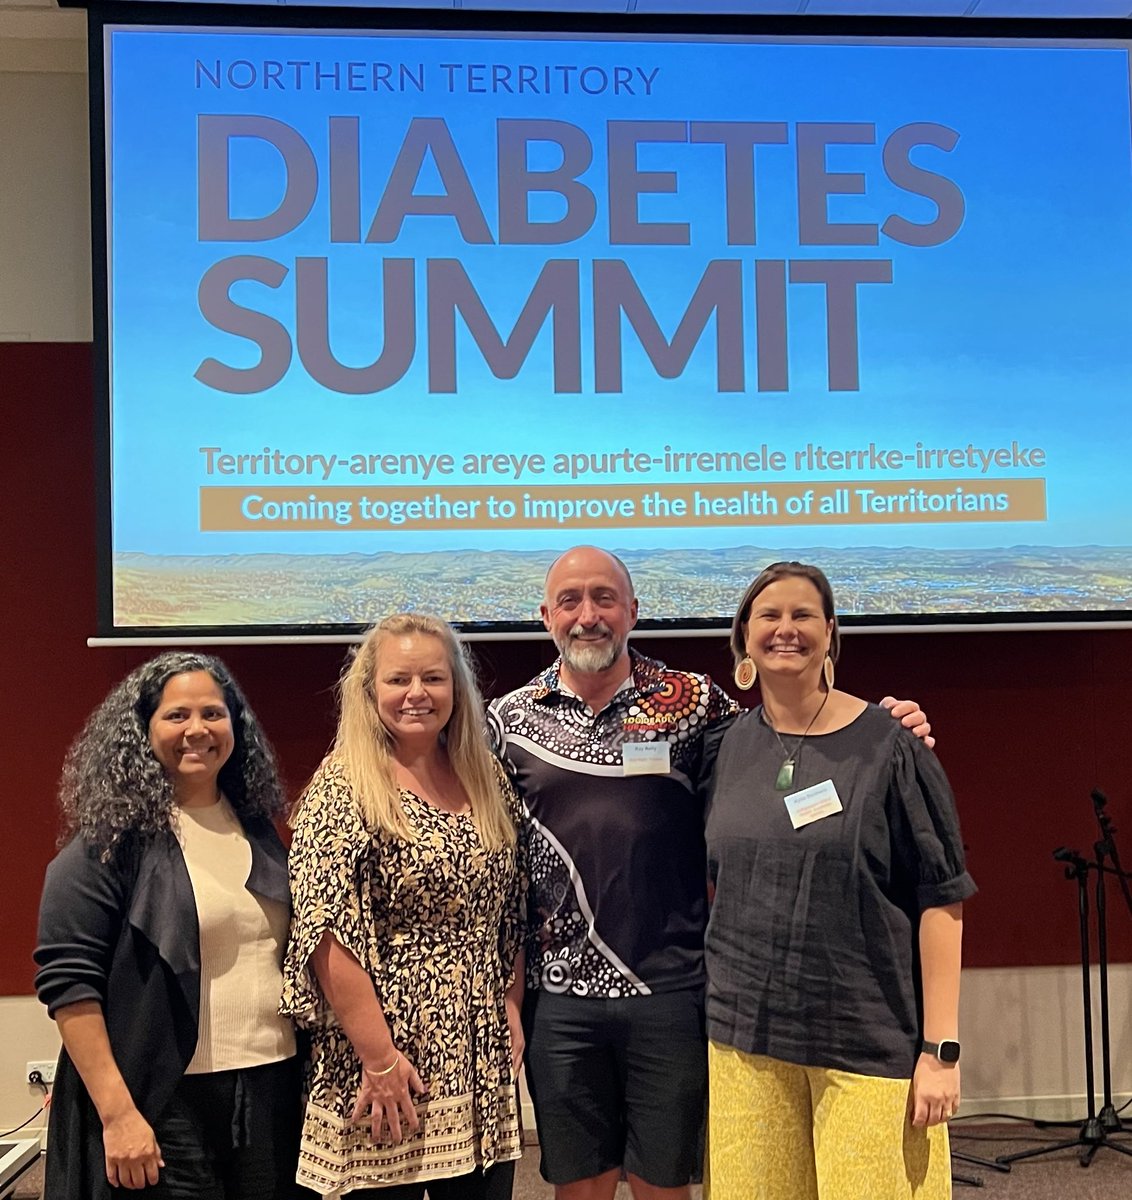 How good is the Northern Territory Diabetes Summit! And great catching up with these stars of Indigenous health! @DiabetesAus @IAHA_National @NTPHN @AMSANTaus